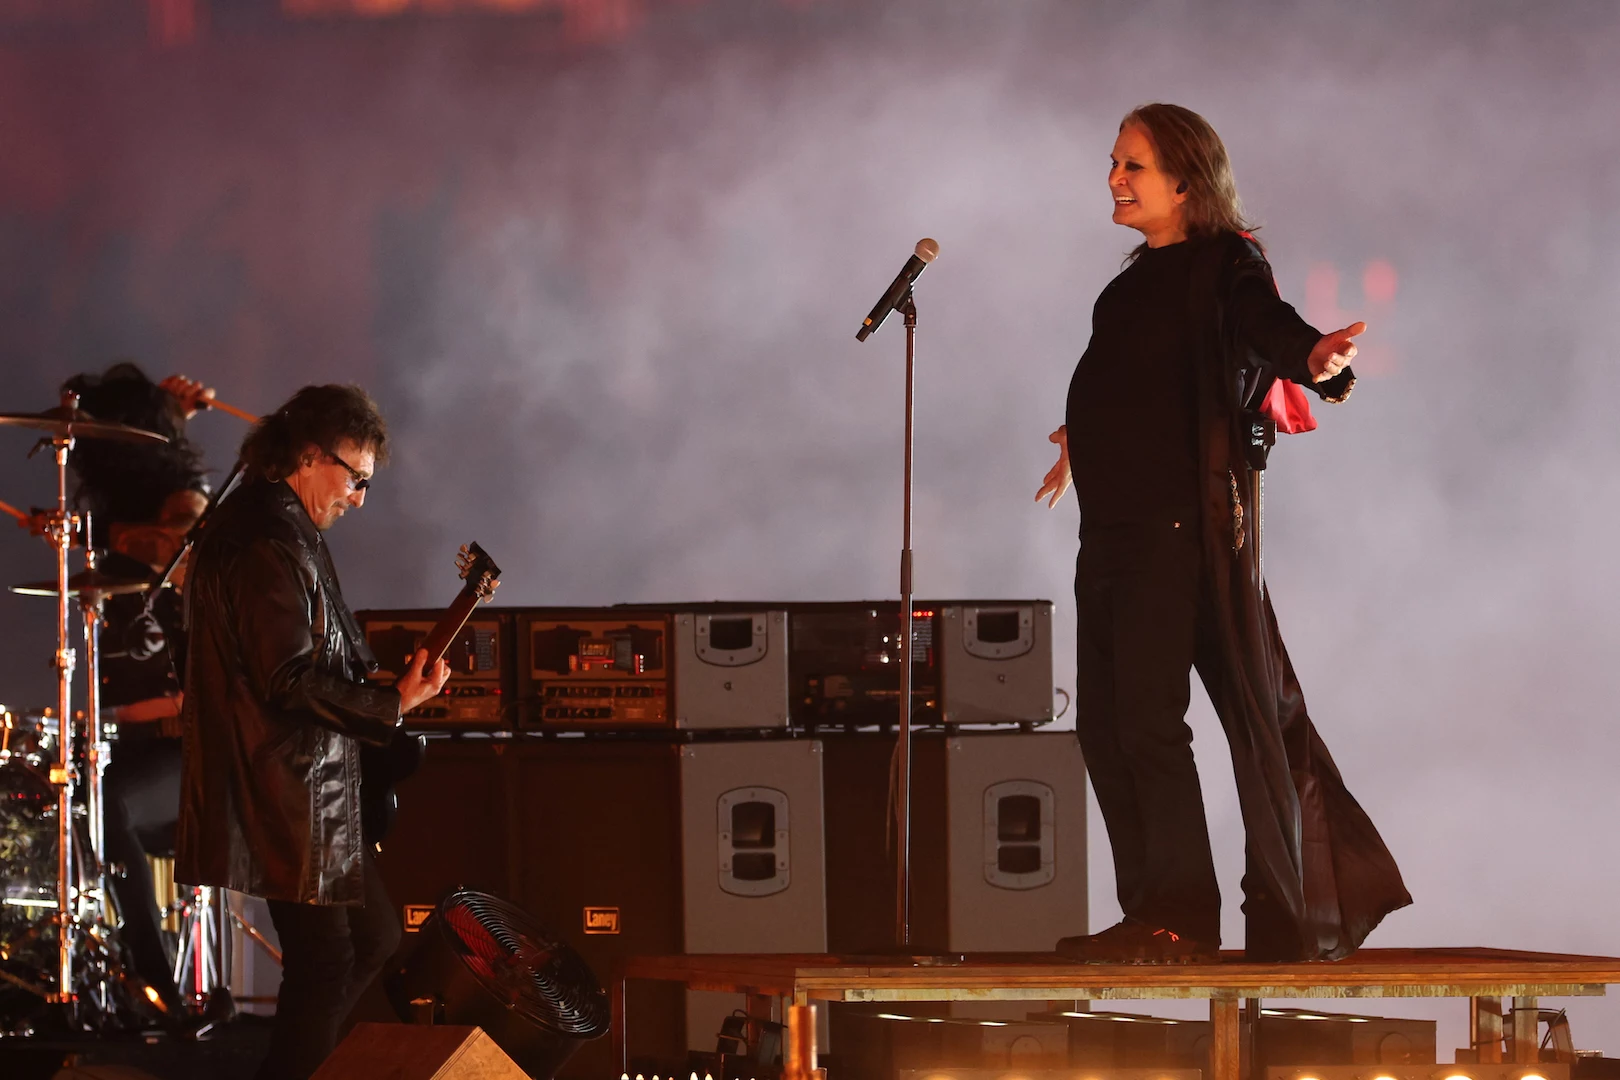 Ozzy + Iommi Reunite to Play Black Sabbath Songs at Ceremony